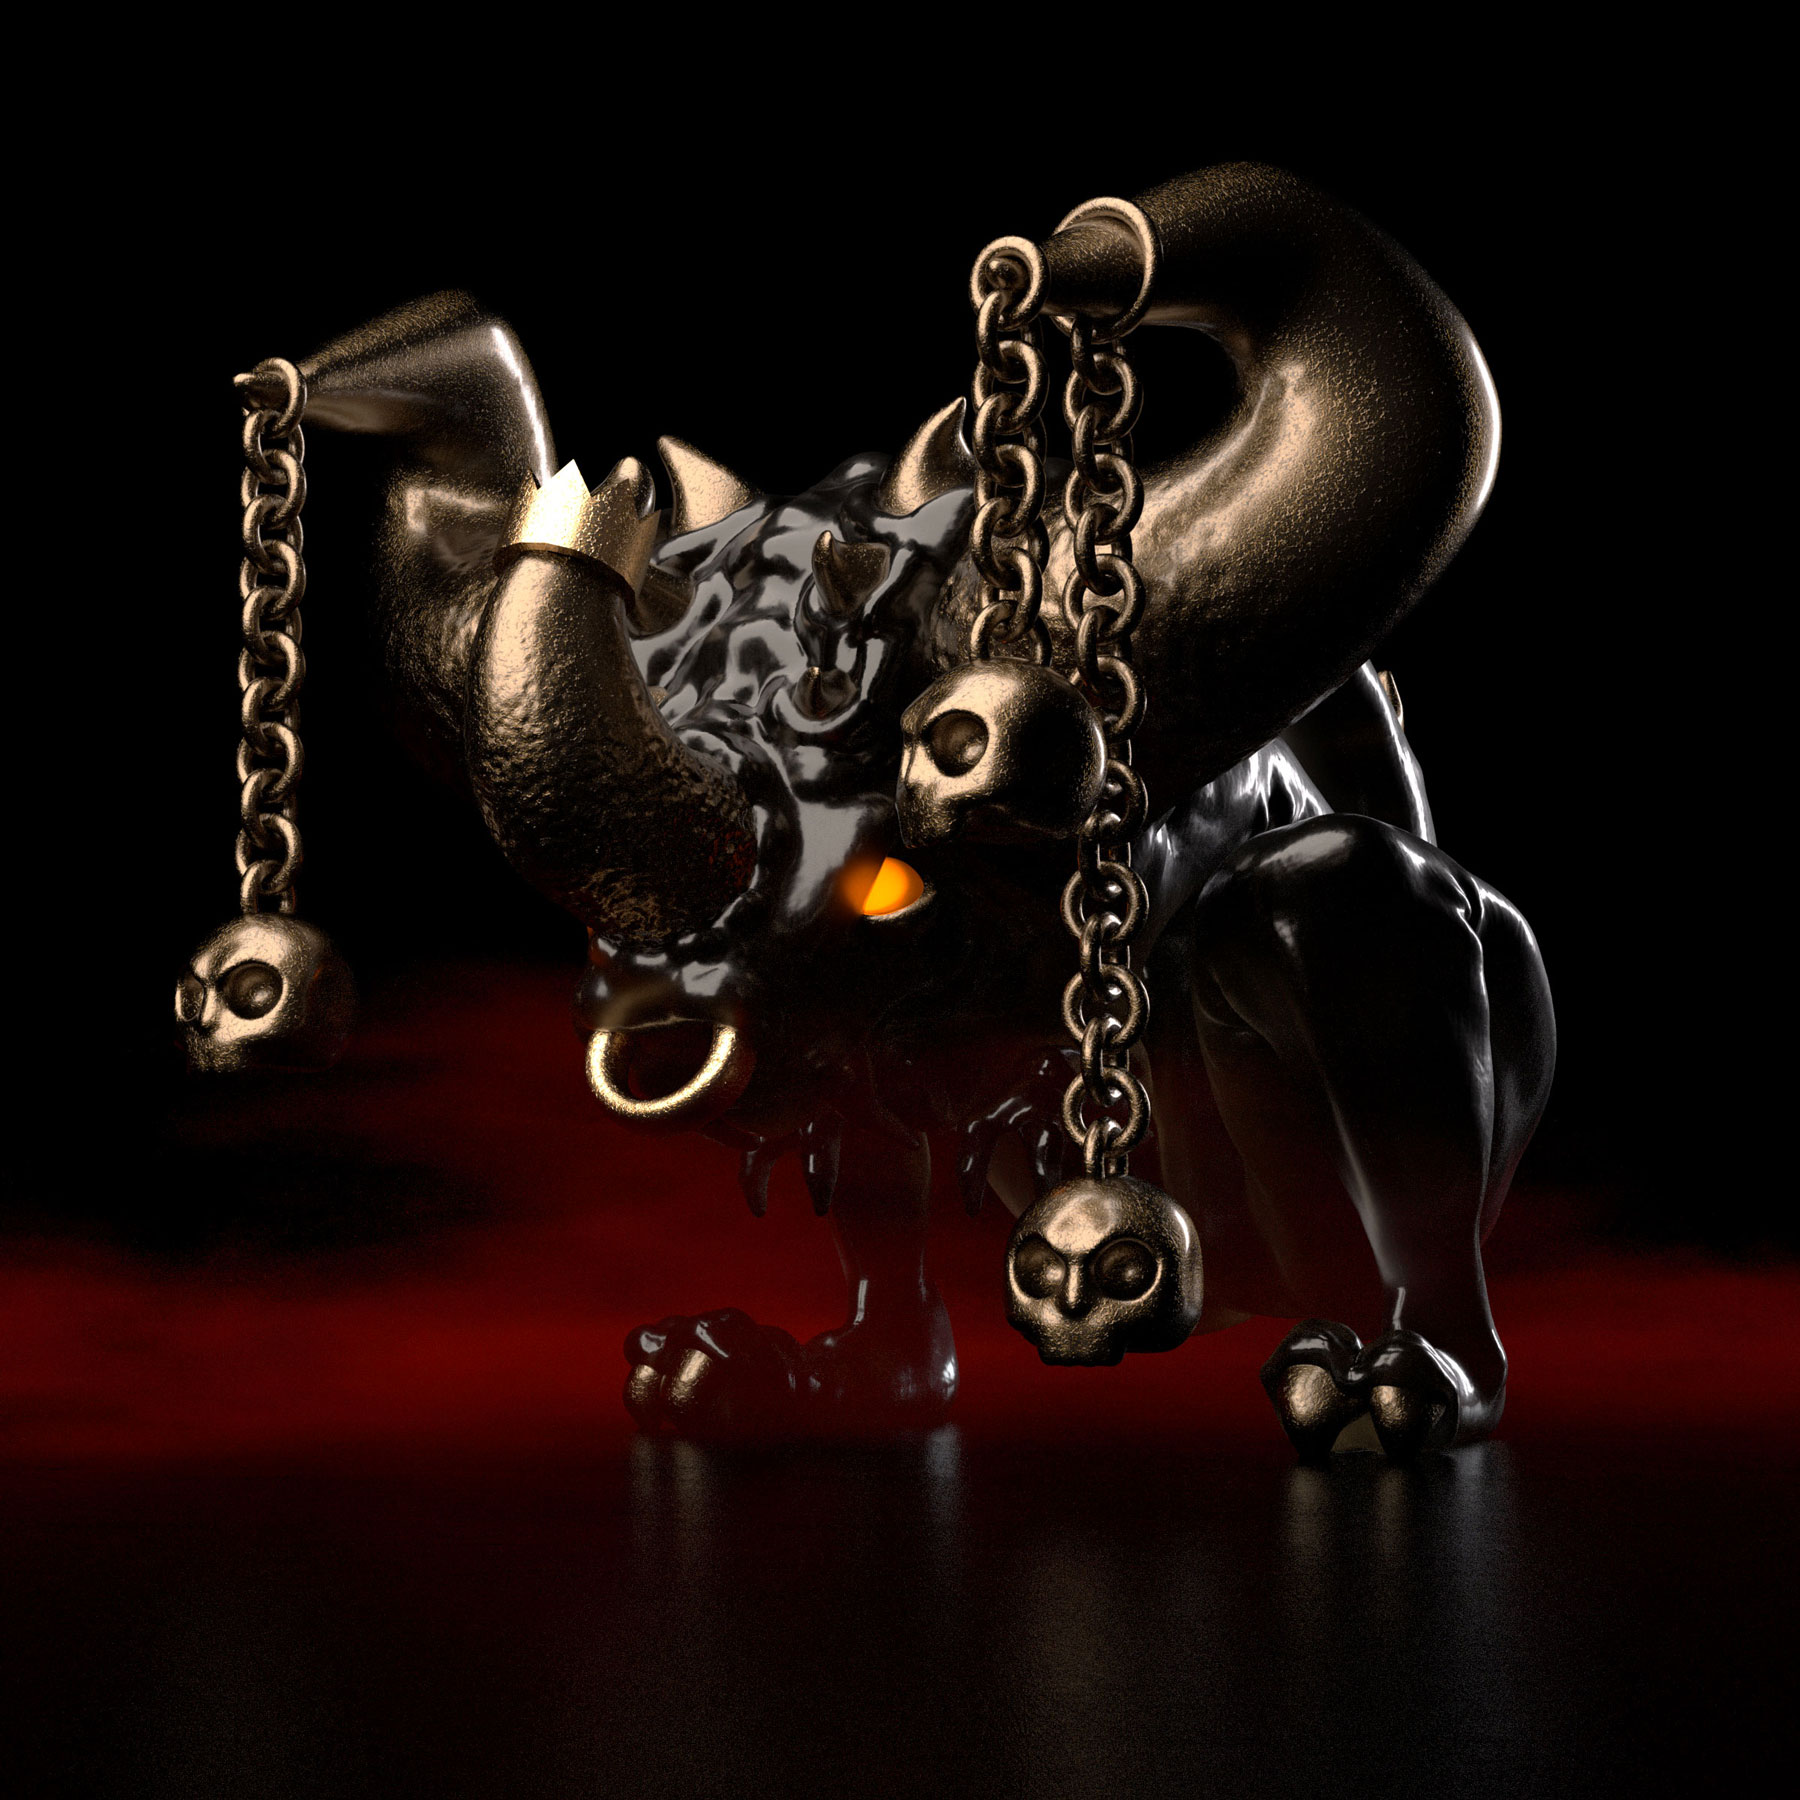 image of a rat with dungeon chains